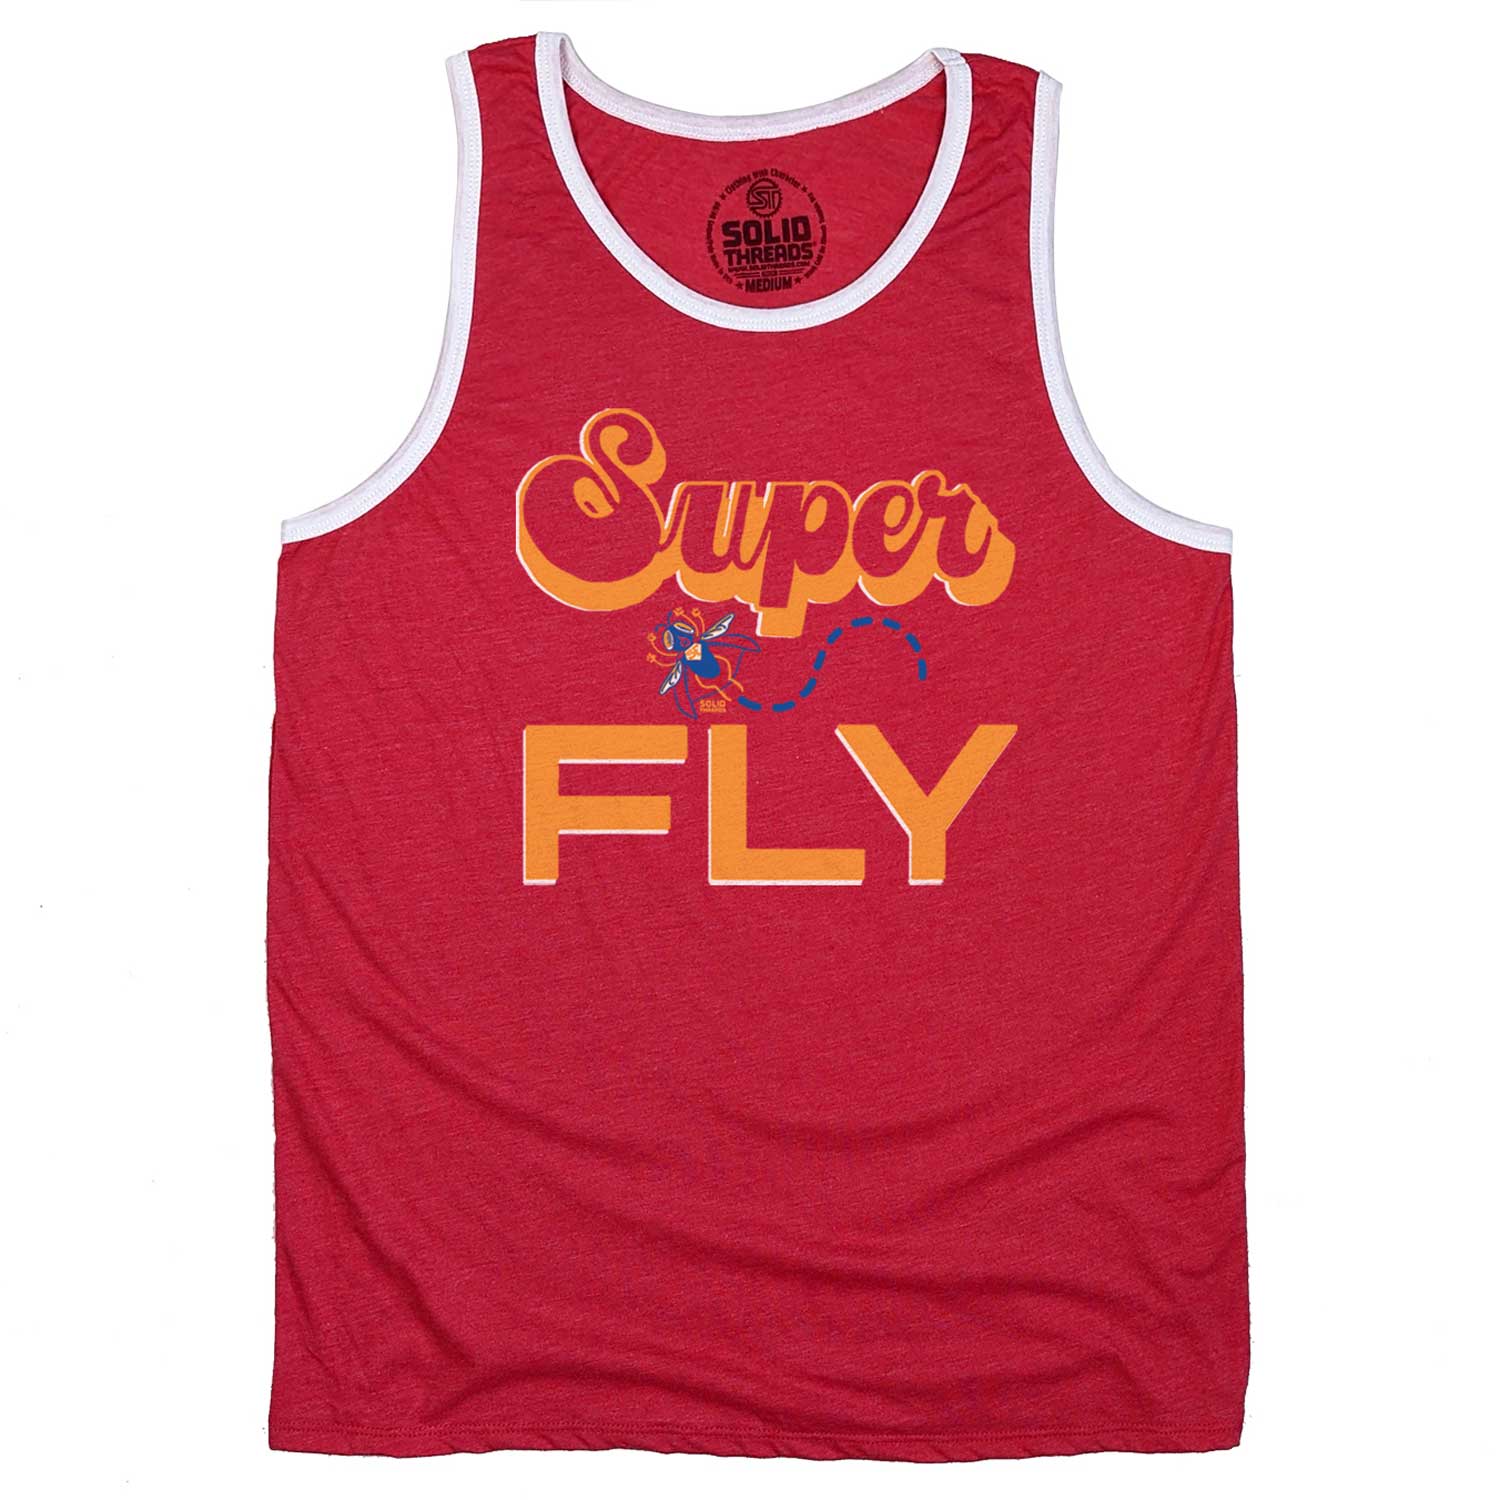 Men's Superfly Vintage Graphic Tank Top | Retro Curtis Mayfield T-shirt | Solid Threads